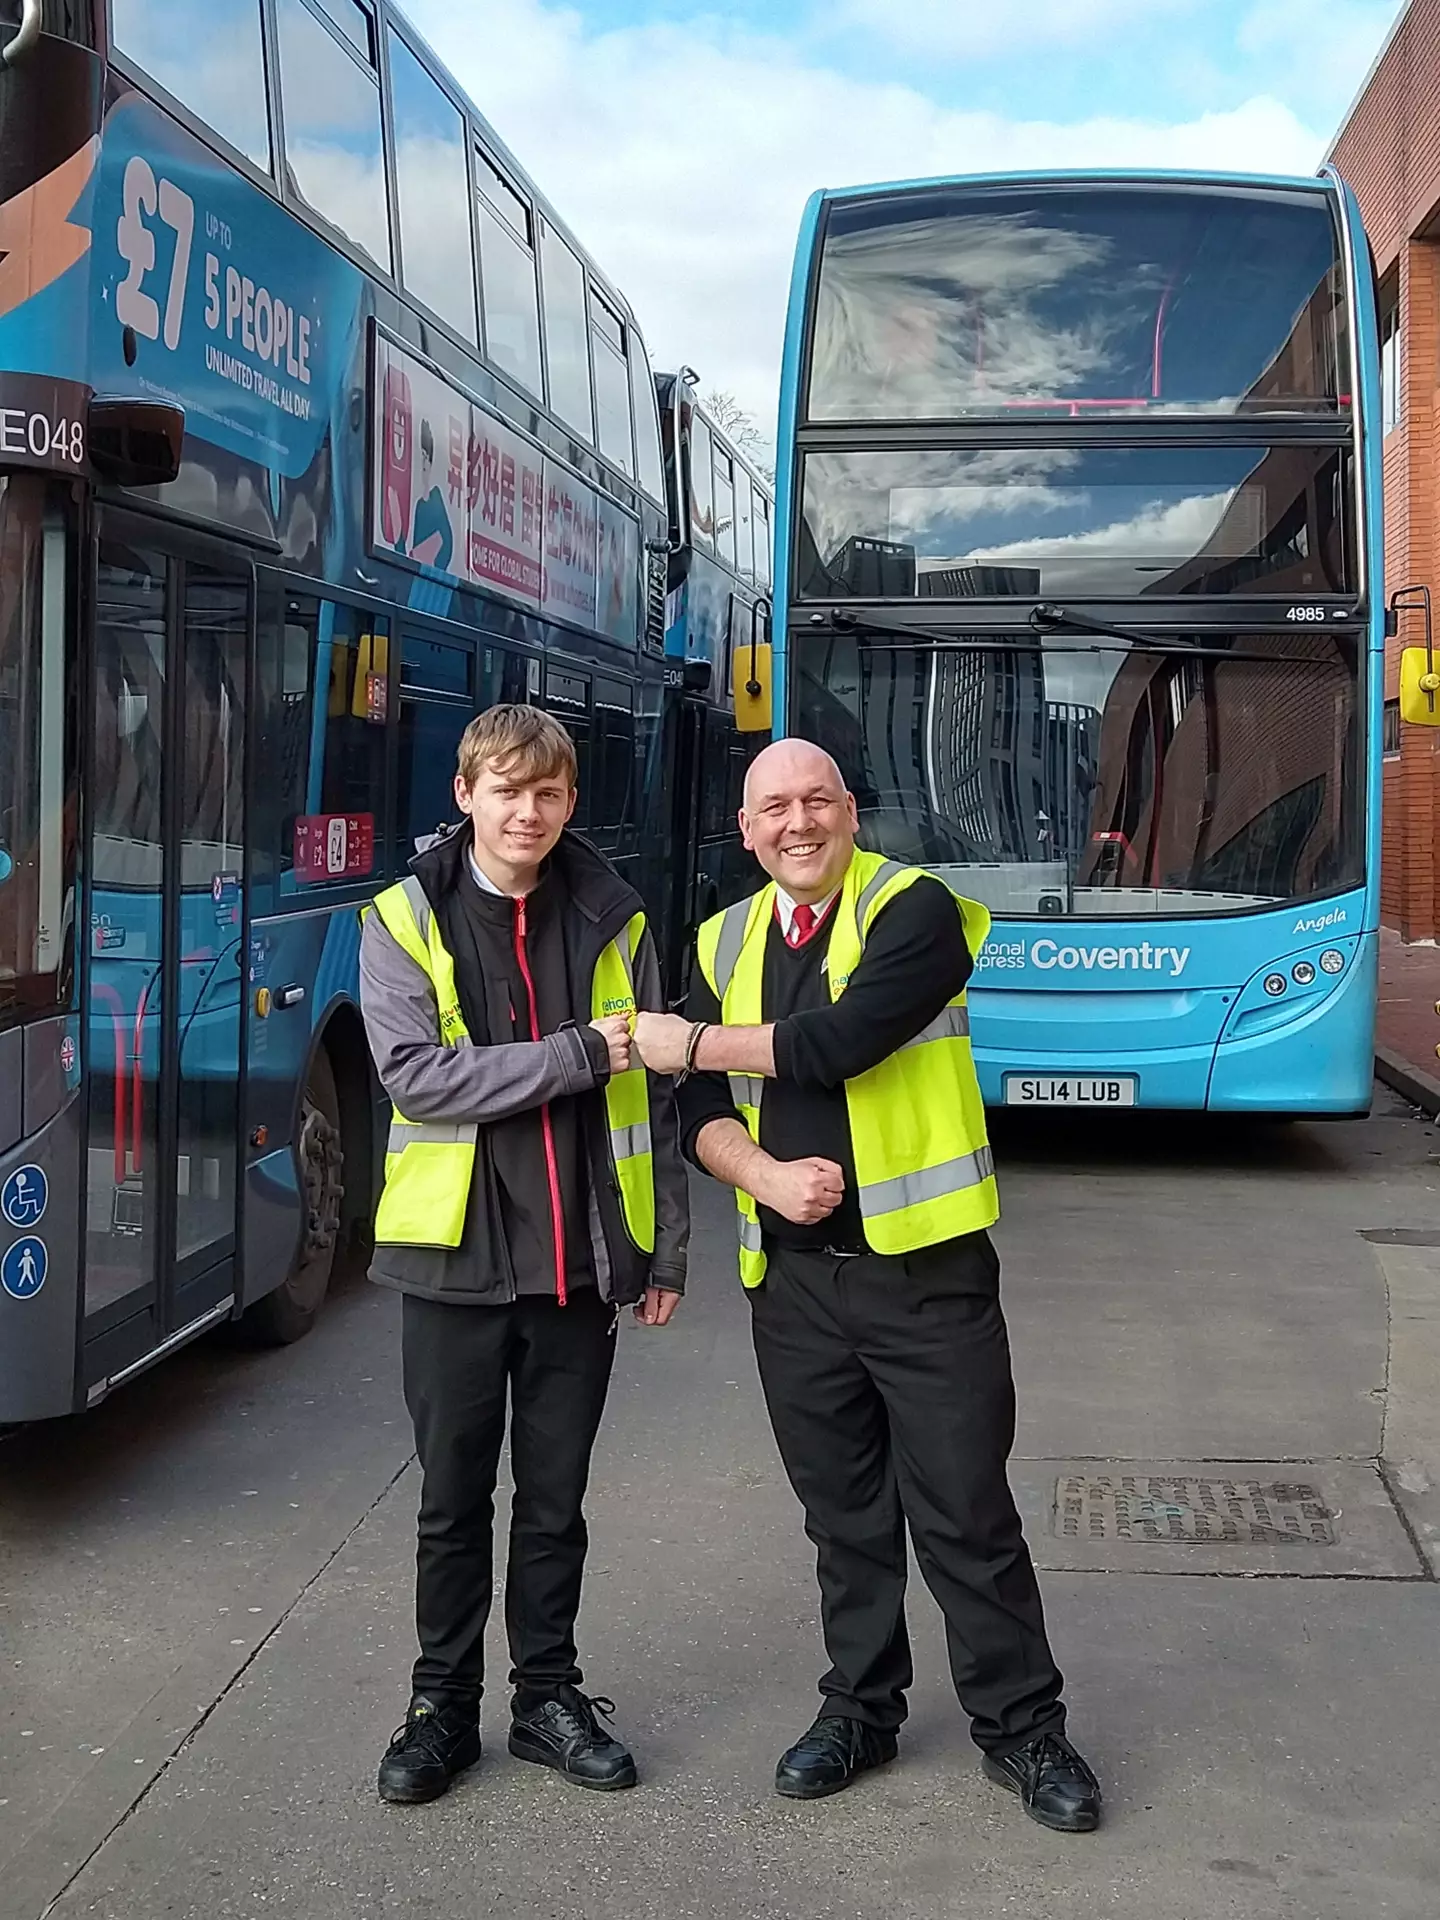 Luke has said one of the best parts of his job is getting to work with his dad, who has been a bus driver for 20 years.